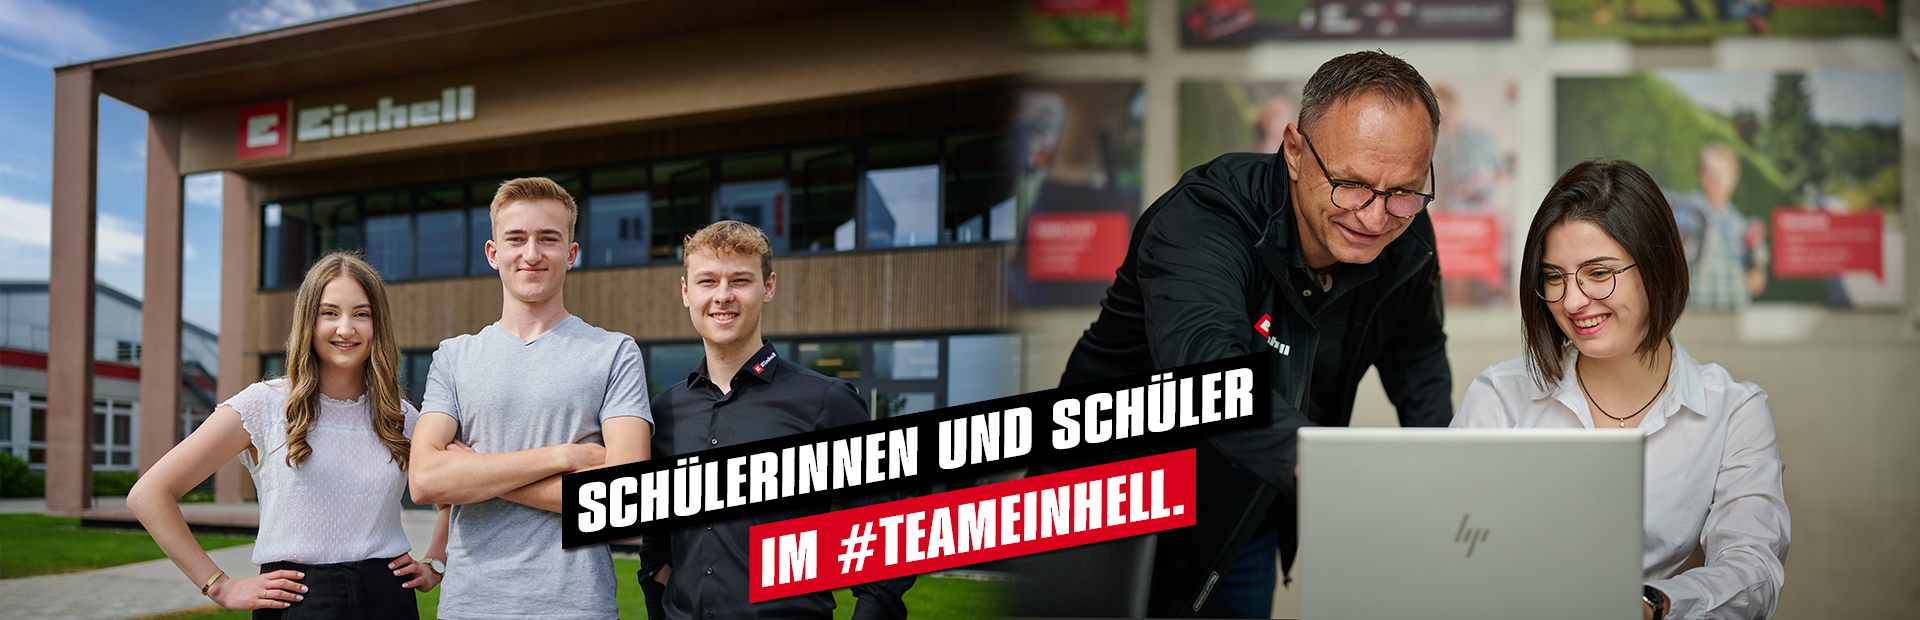 Students in the team einhell